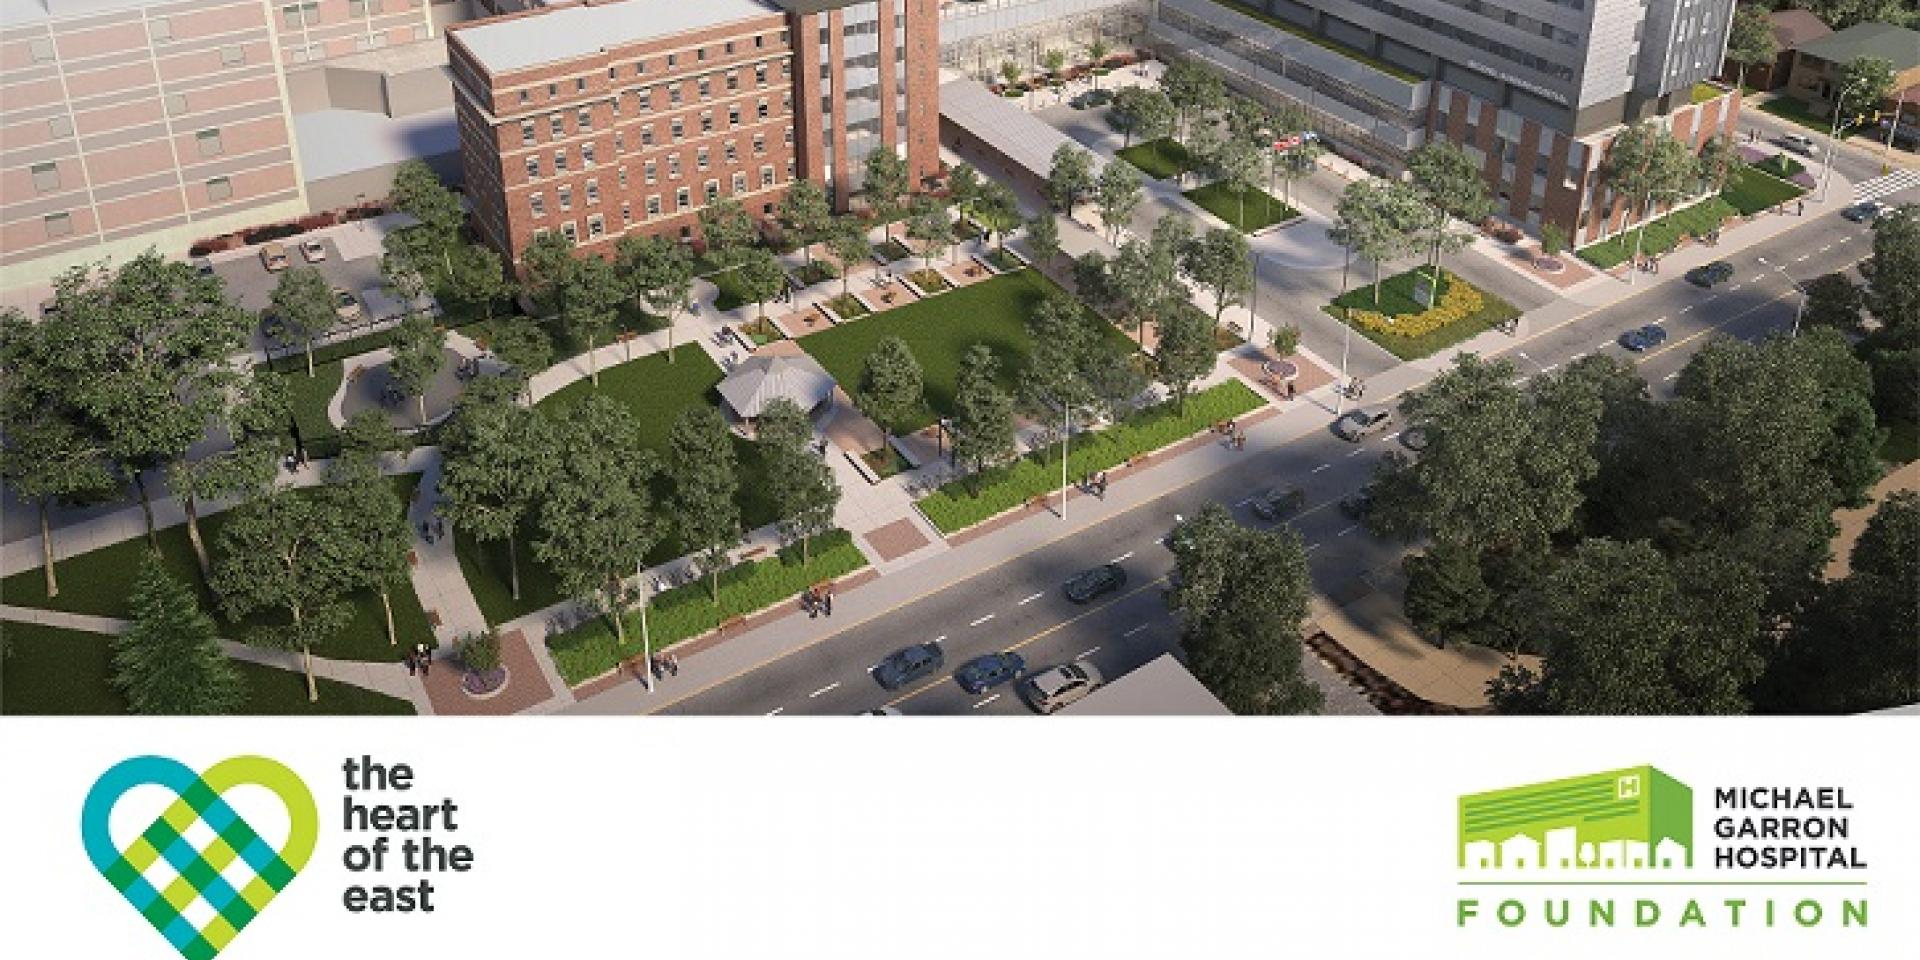 Architect's renderings of the new hospital campus